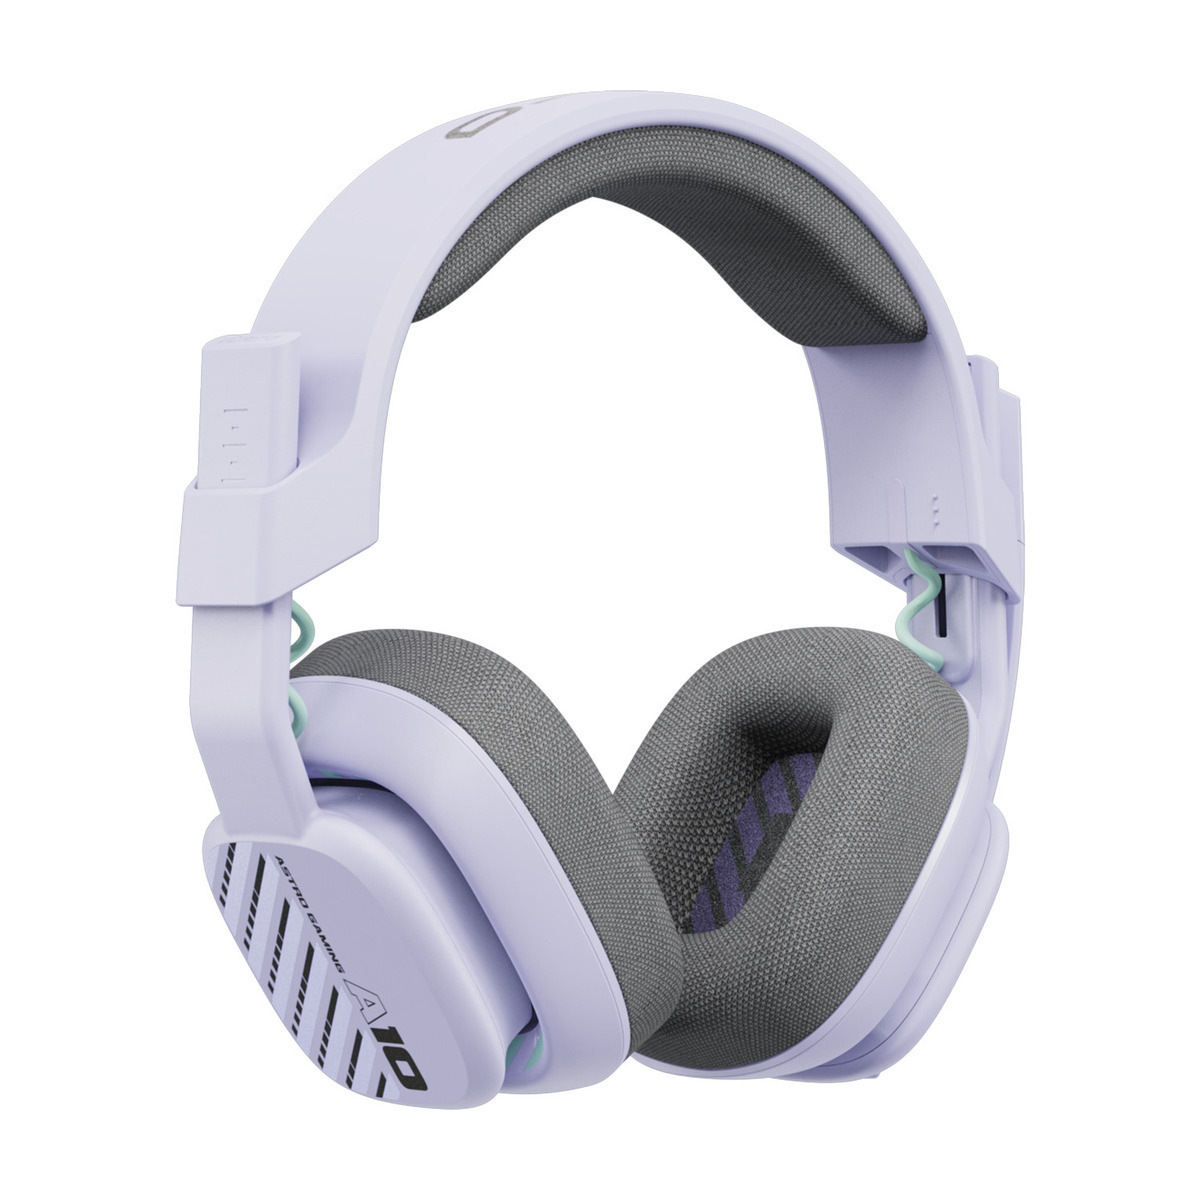 Astro A10 Gen 2. PC gaming headset - asteroid